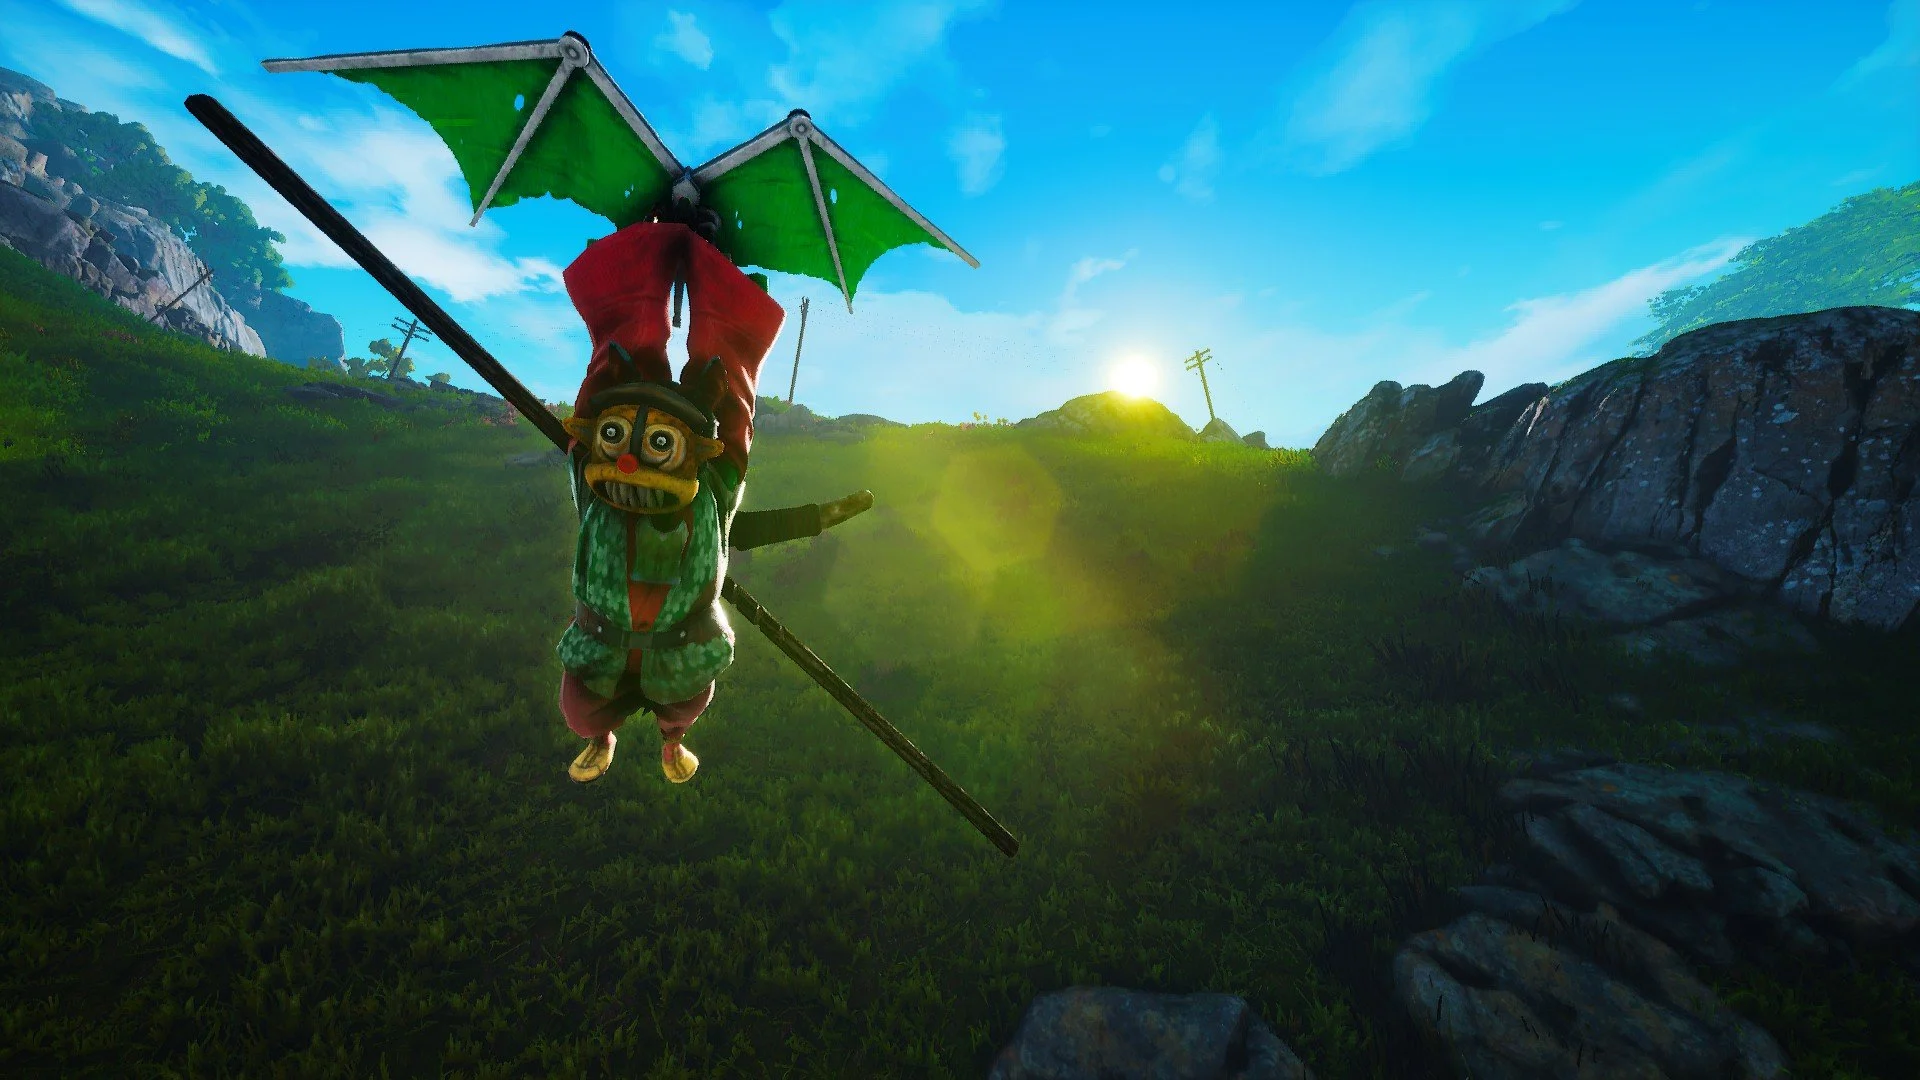 Biomutant: How to improve and fix frame rate drops, stuttering, and lag -  GameRevolution